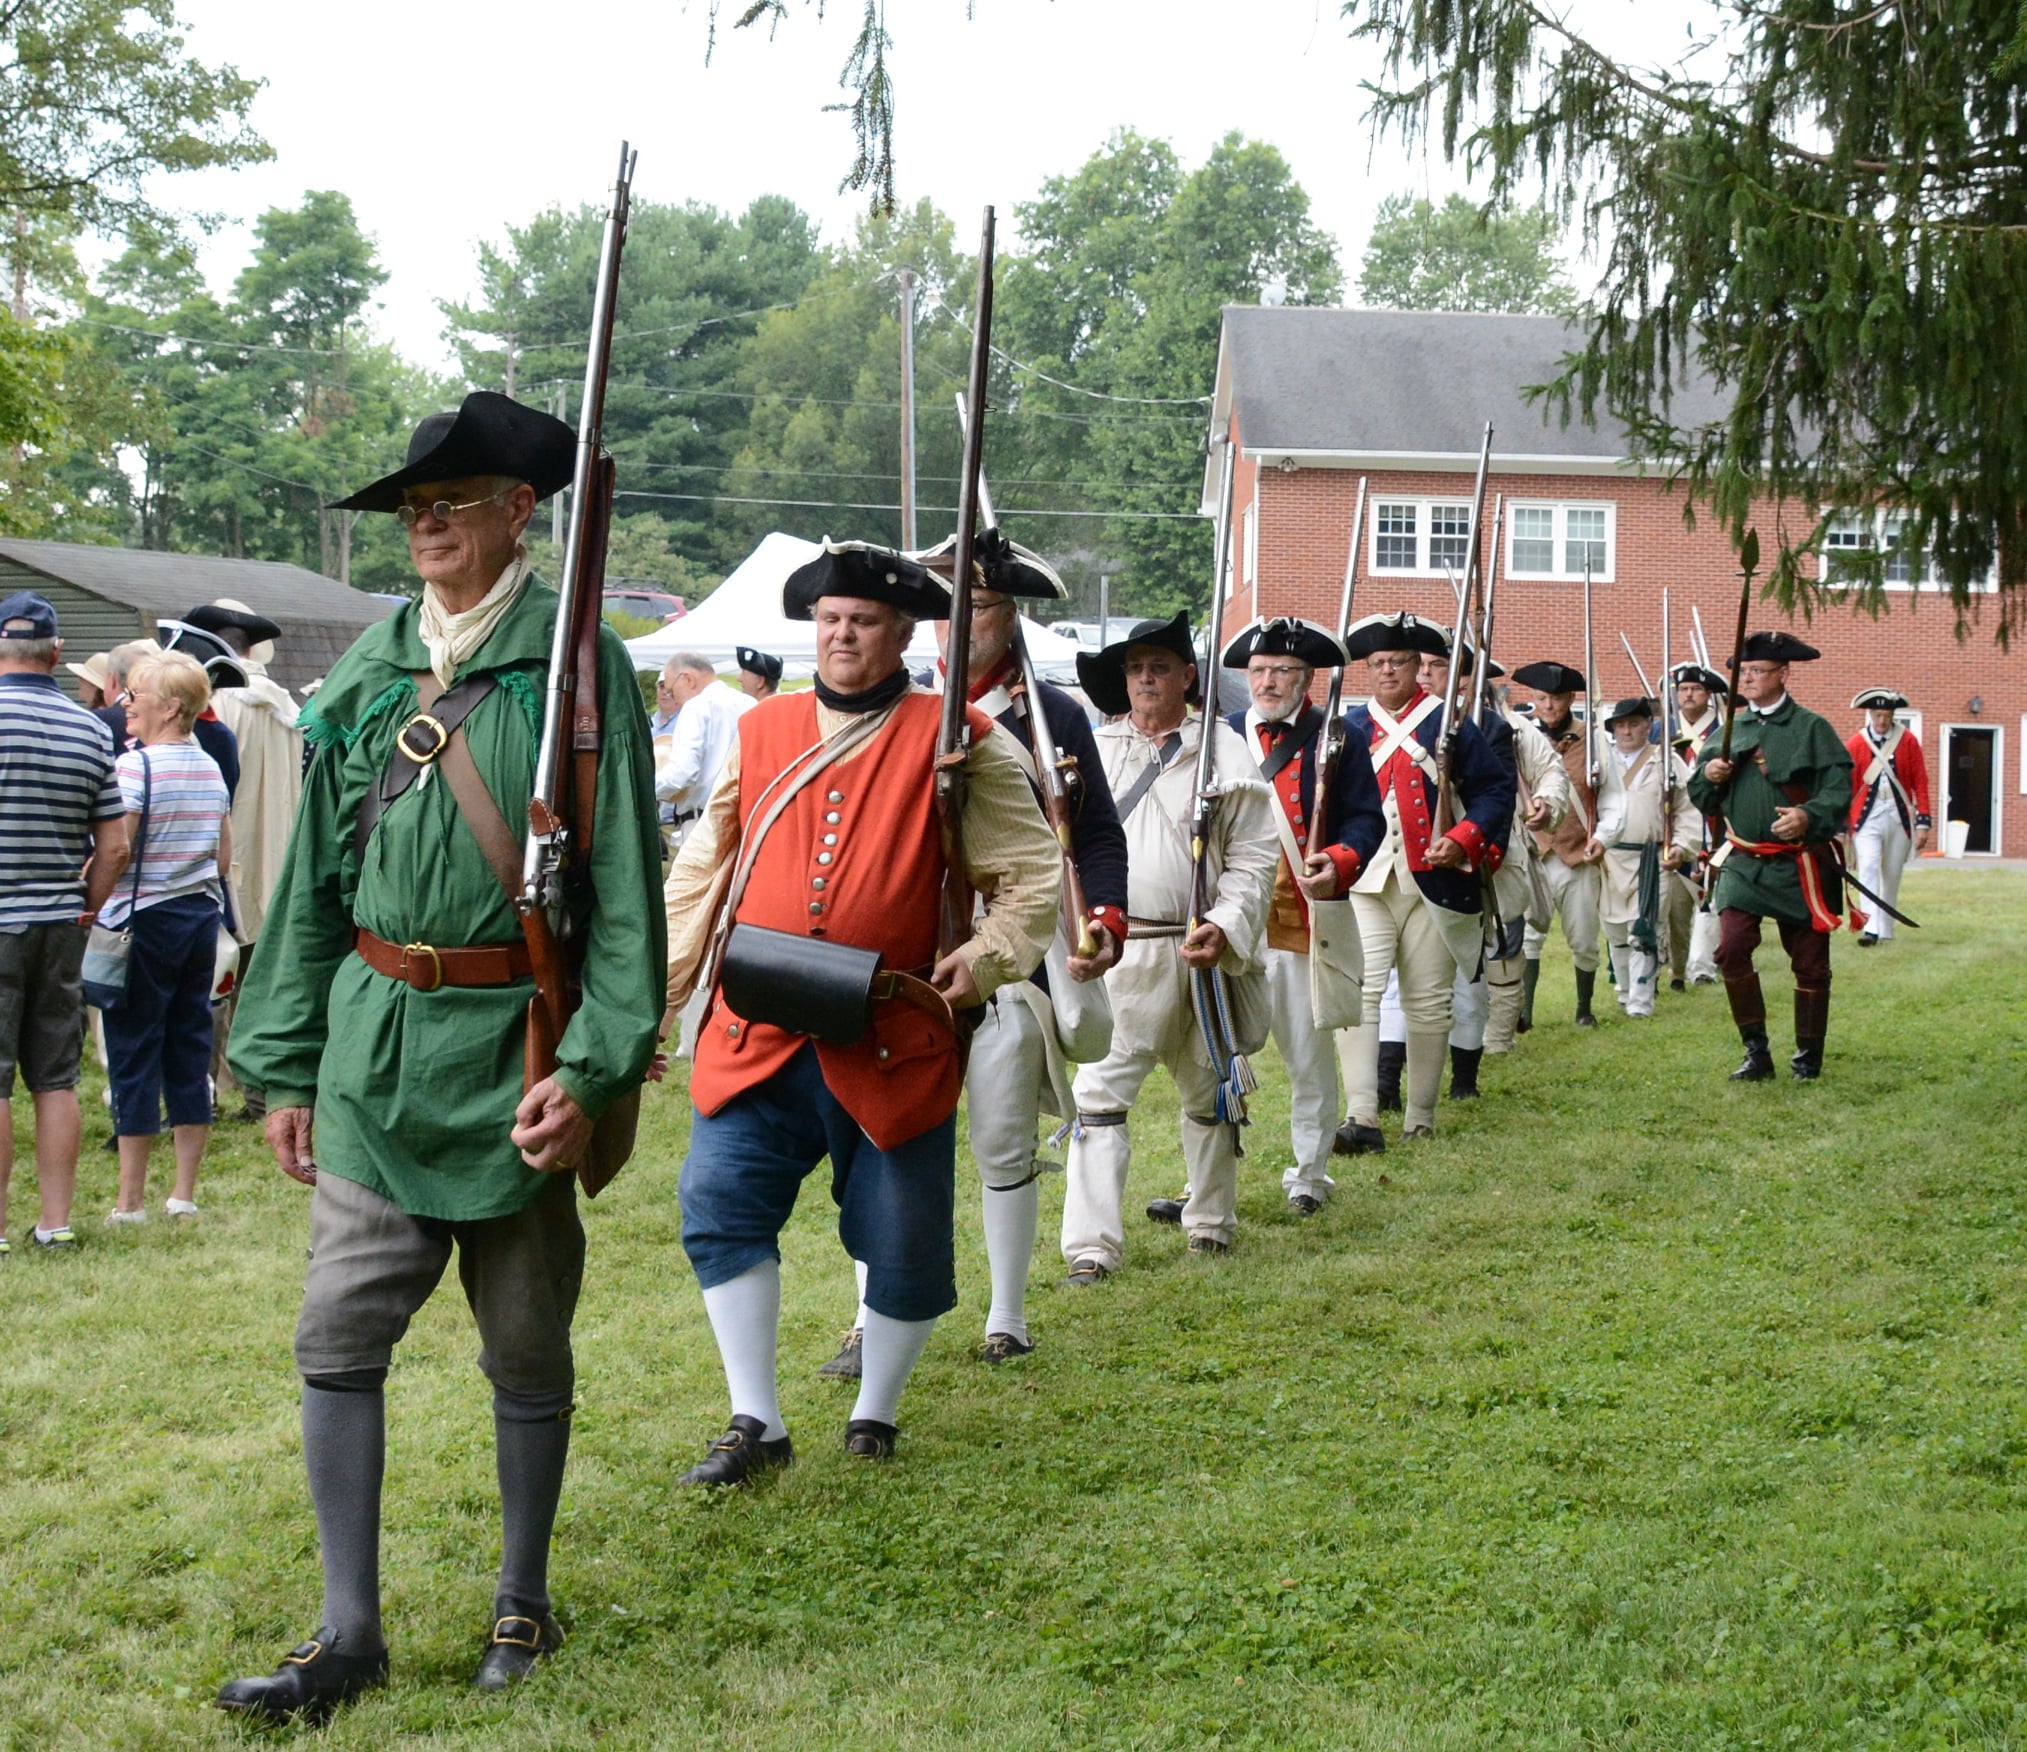 Thumbnail for the post titled: Over 100 attend Revolutionary War ceremony in Lovettsville